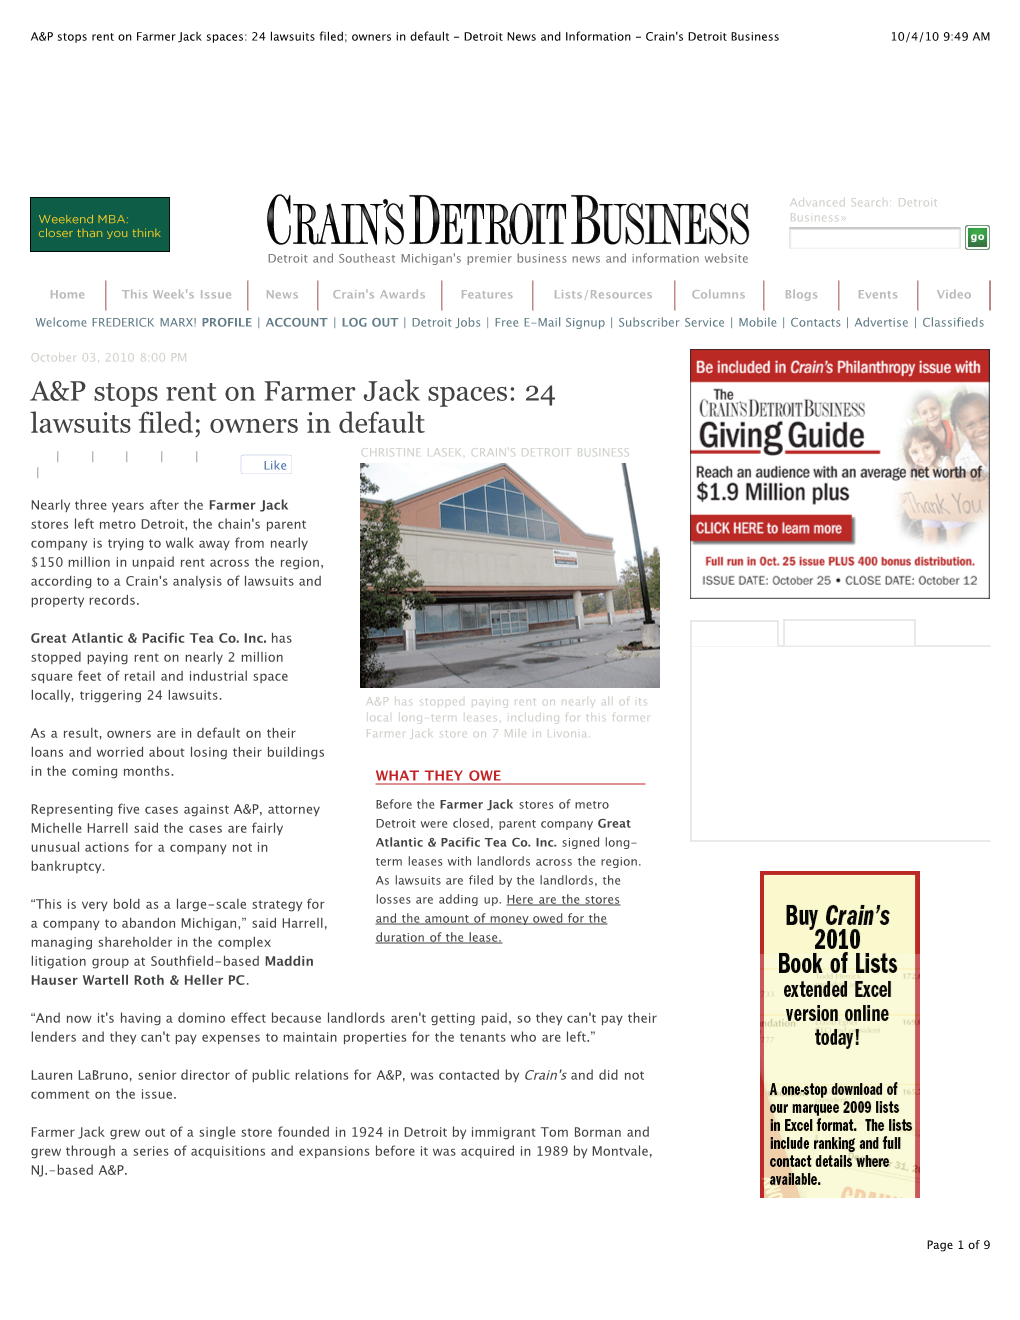 A&P Stops Rent on Farmer Jack Spaces: 24 Lawsuits